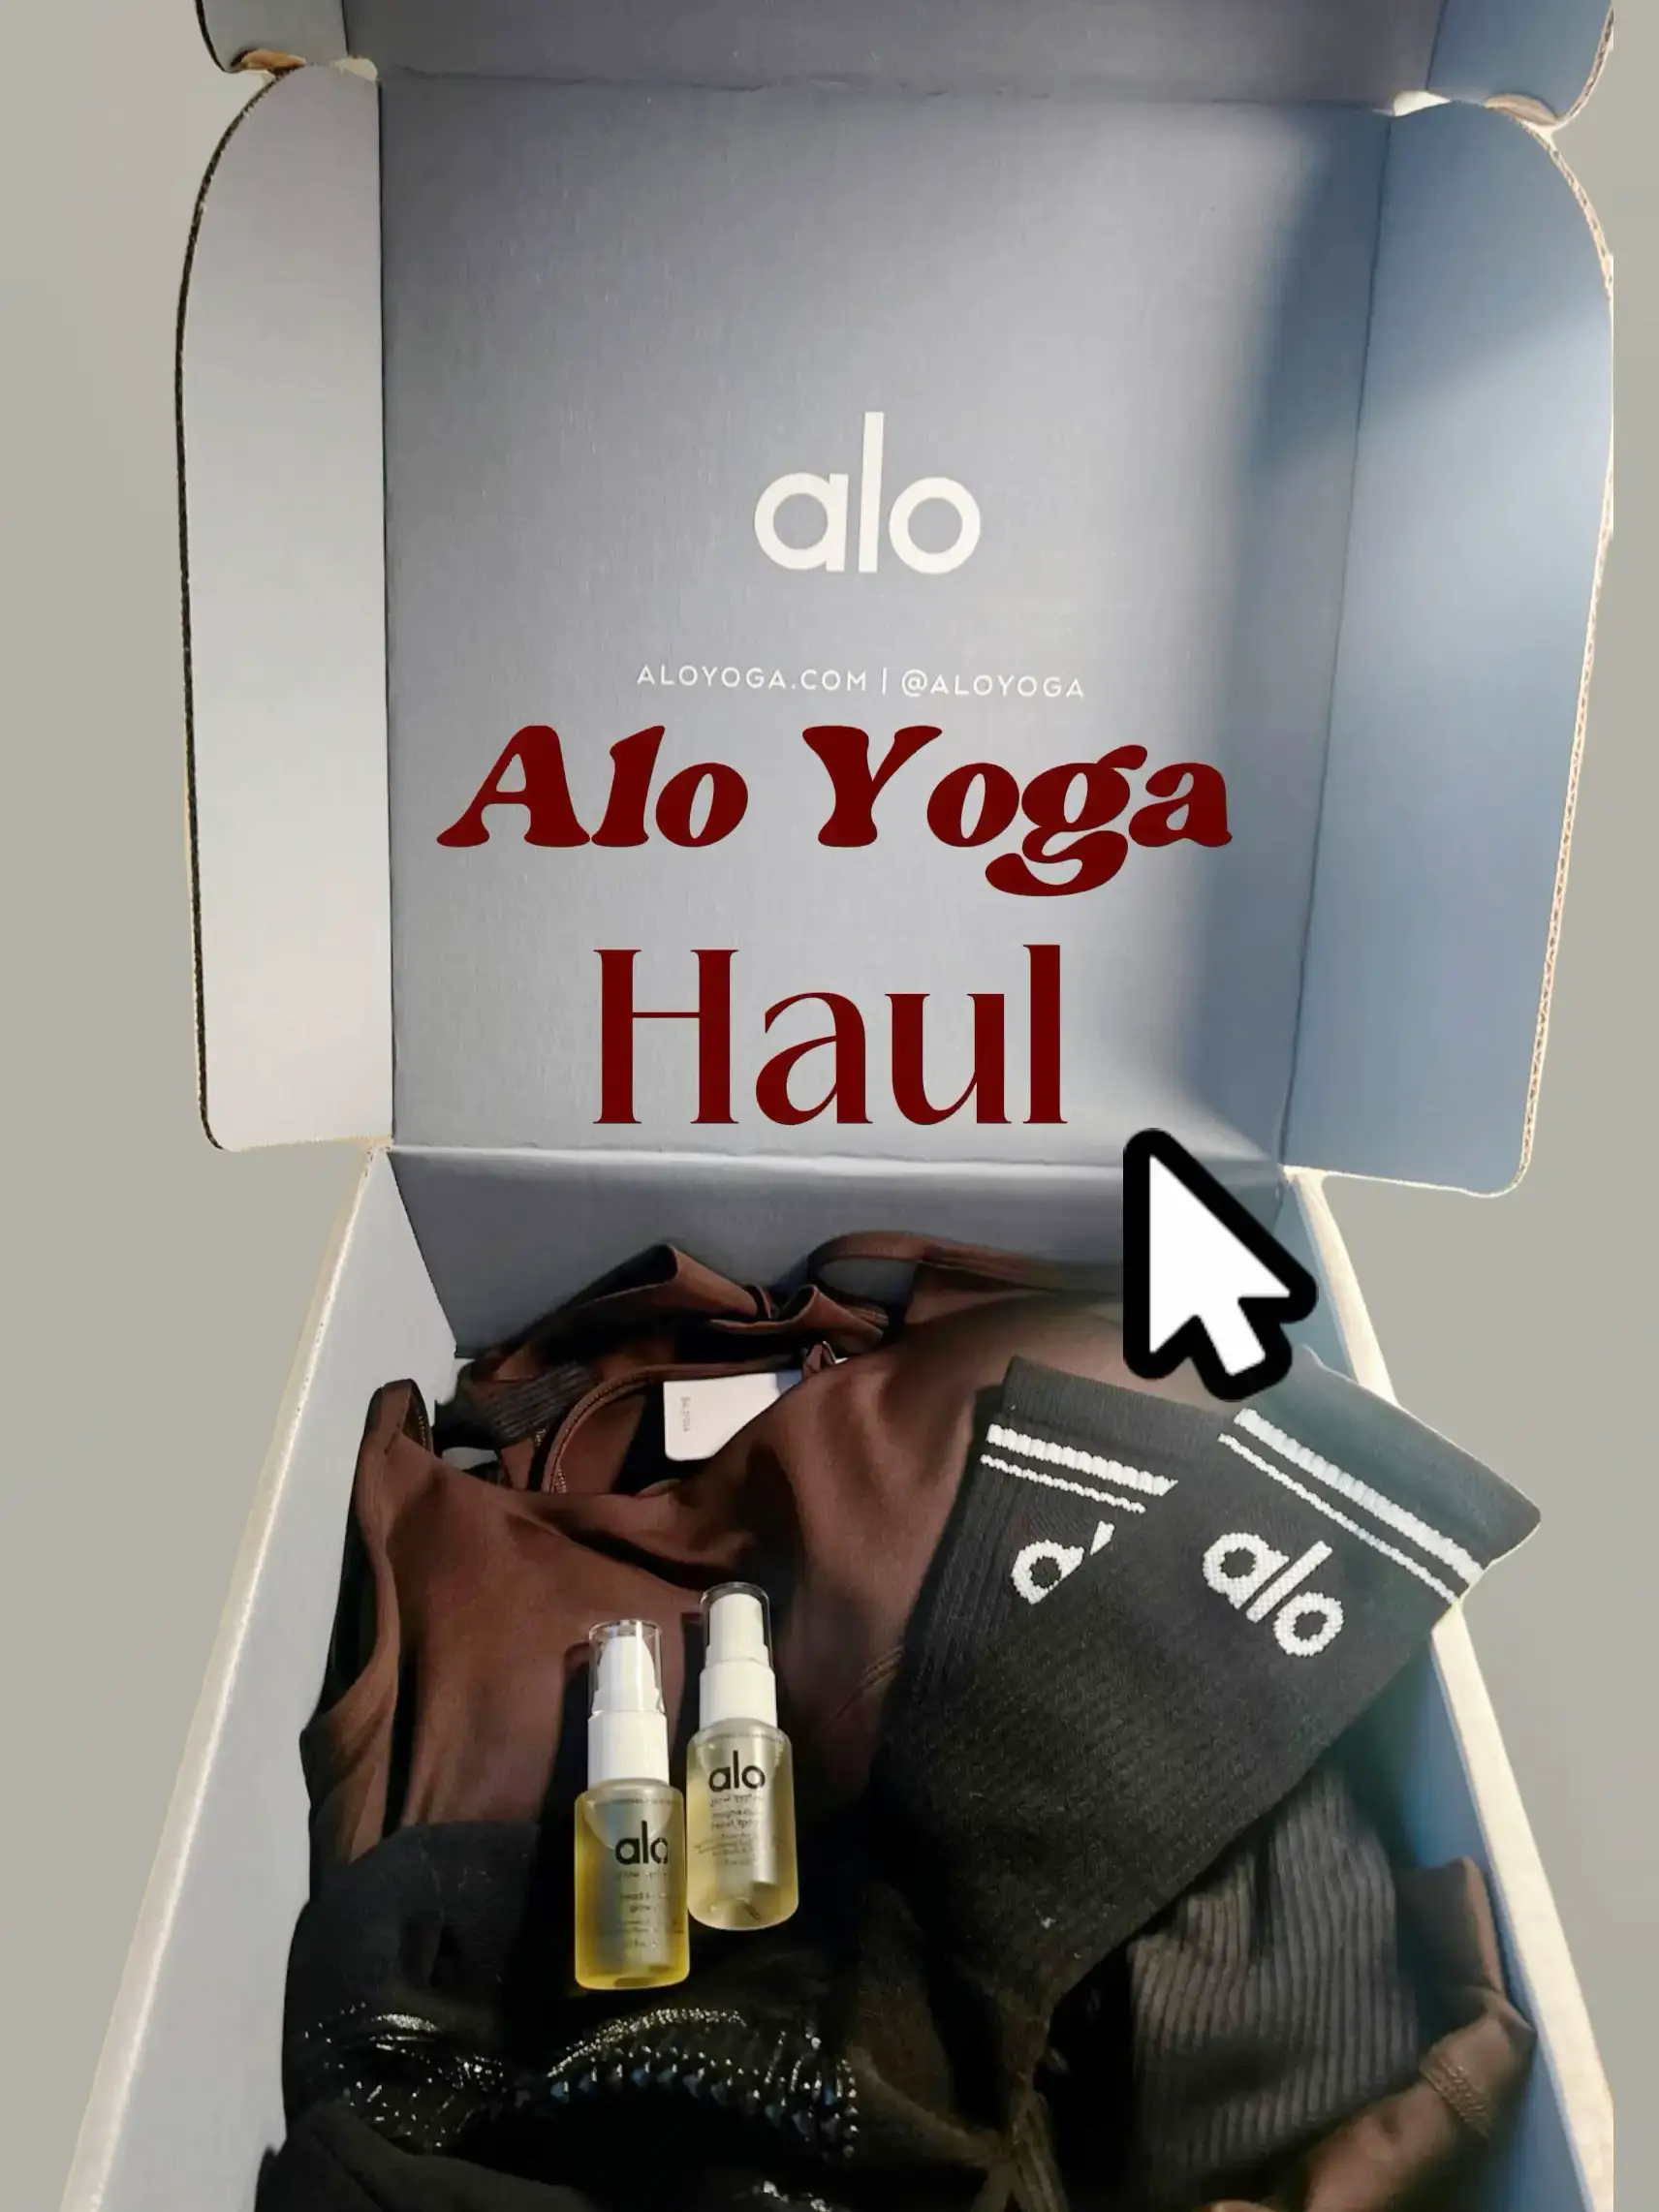 New Brand Alert ‼️We say hello to @aloyoga and are so happy to